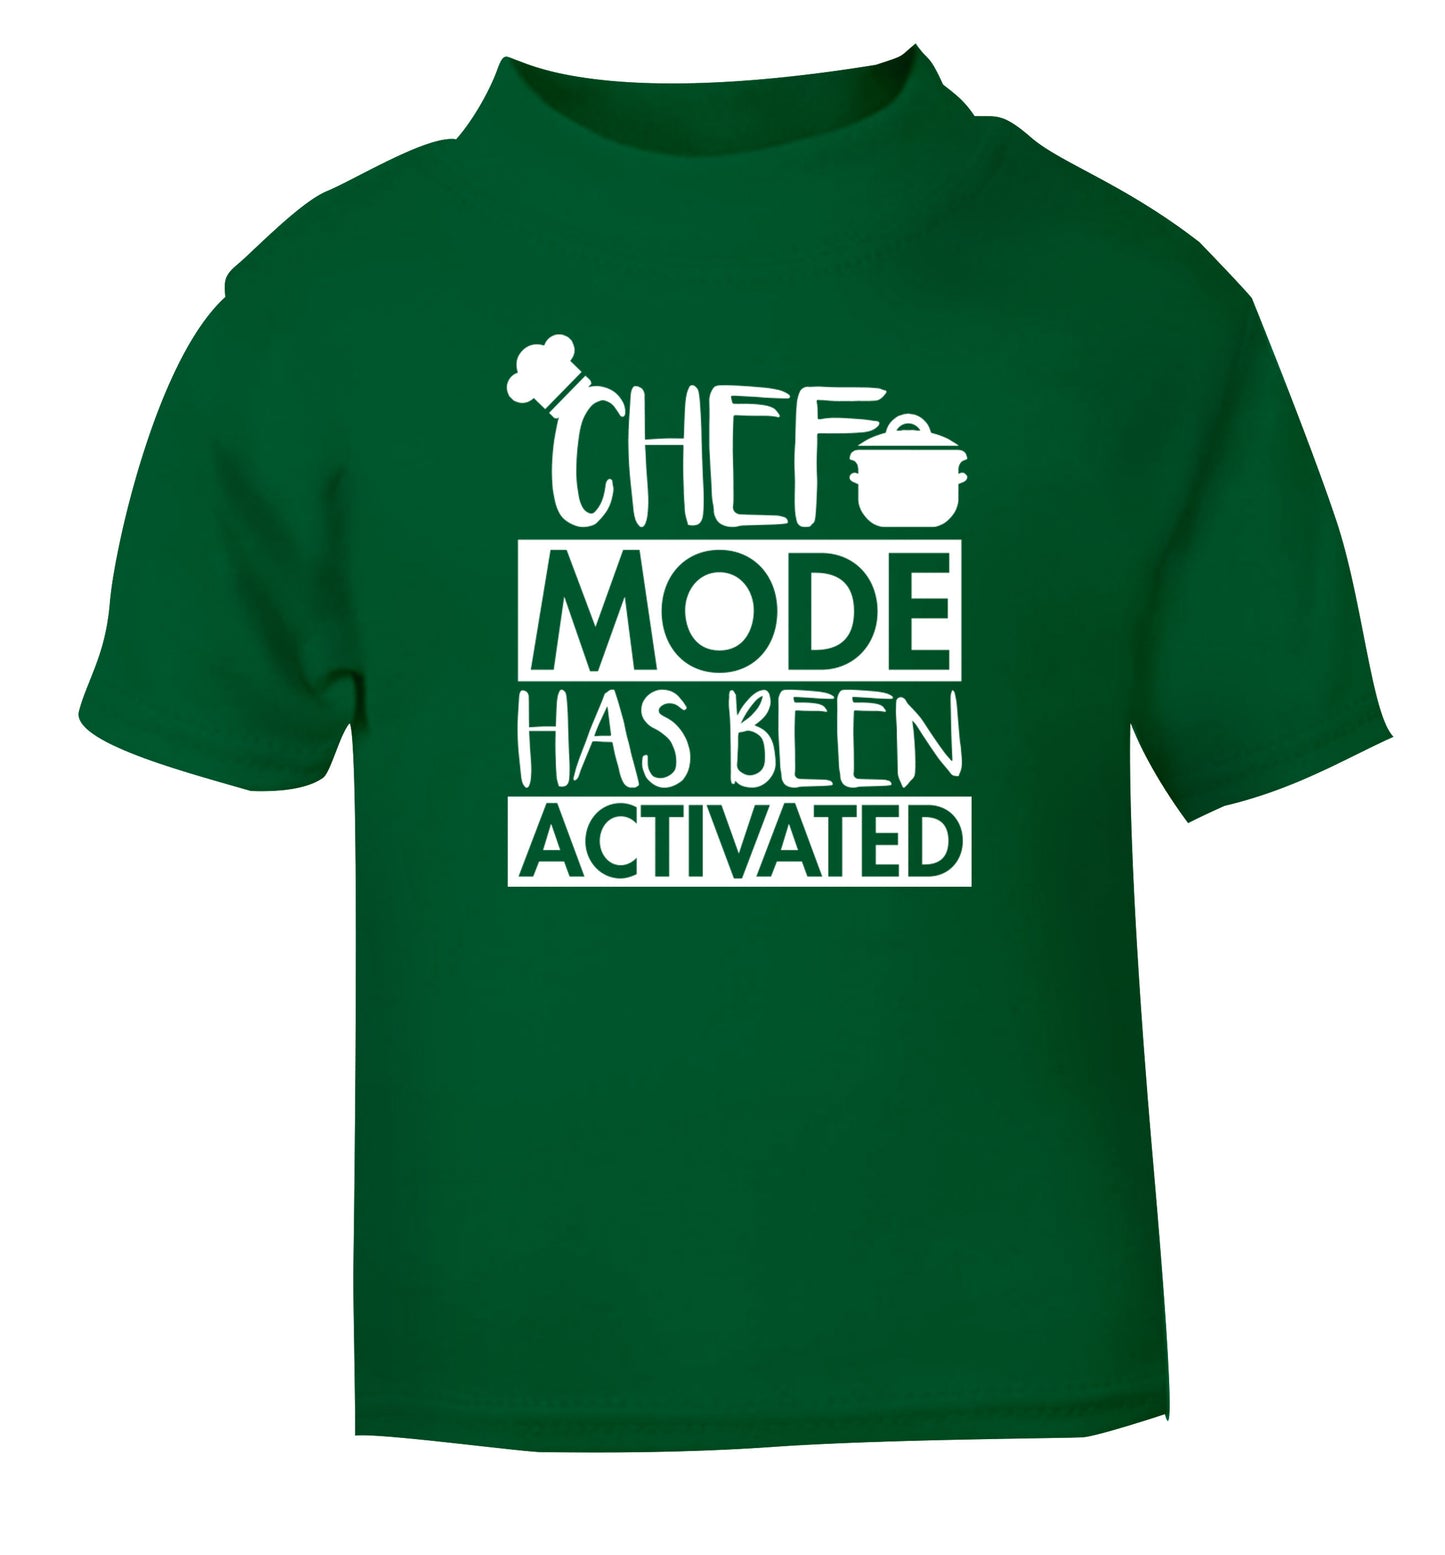 Chef mode has been activated green Baby Toddler Tshirt 2 Years